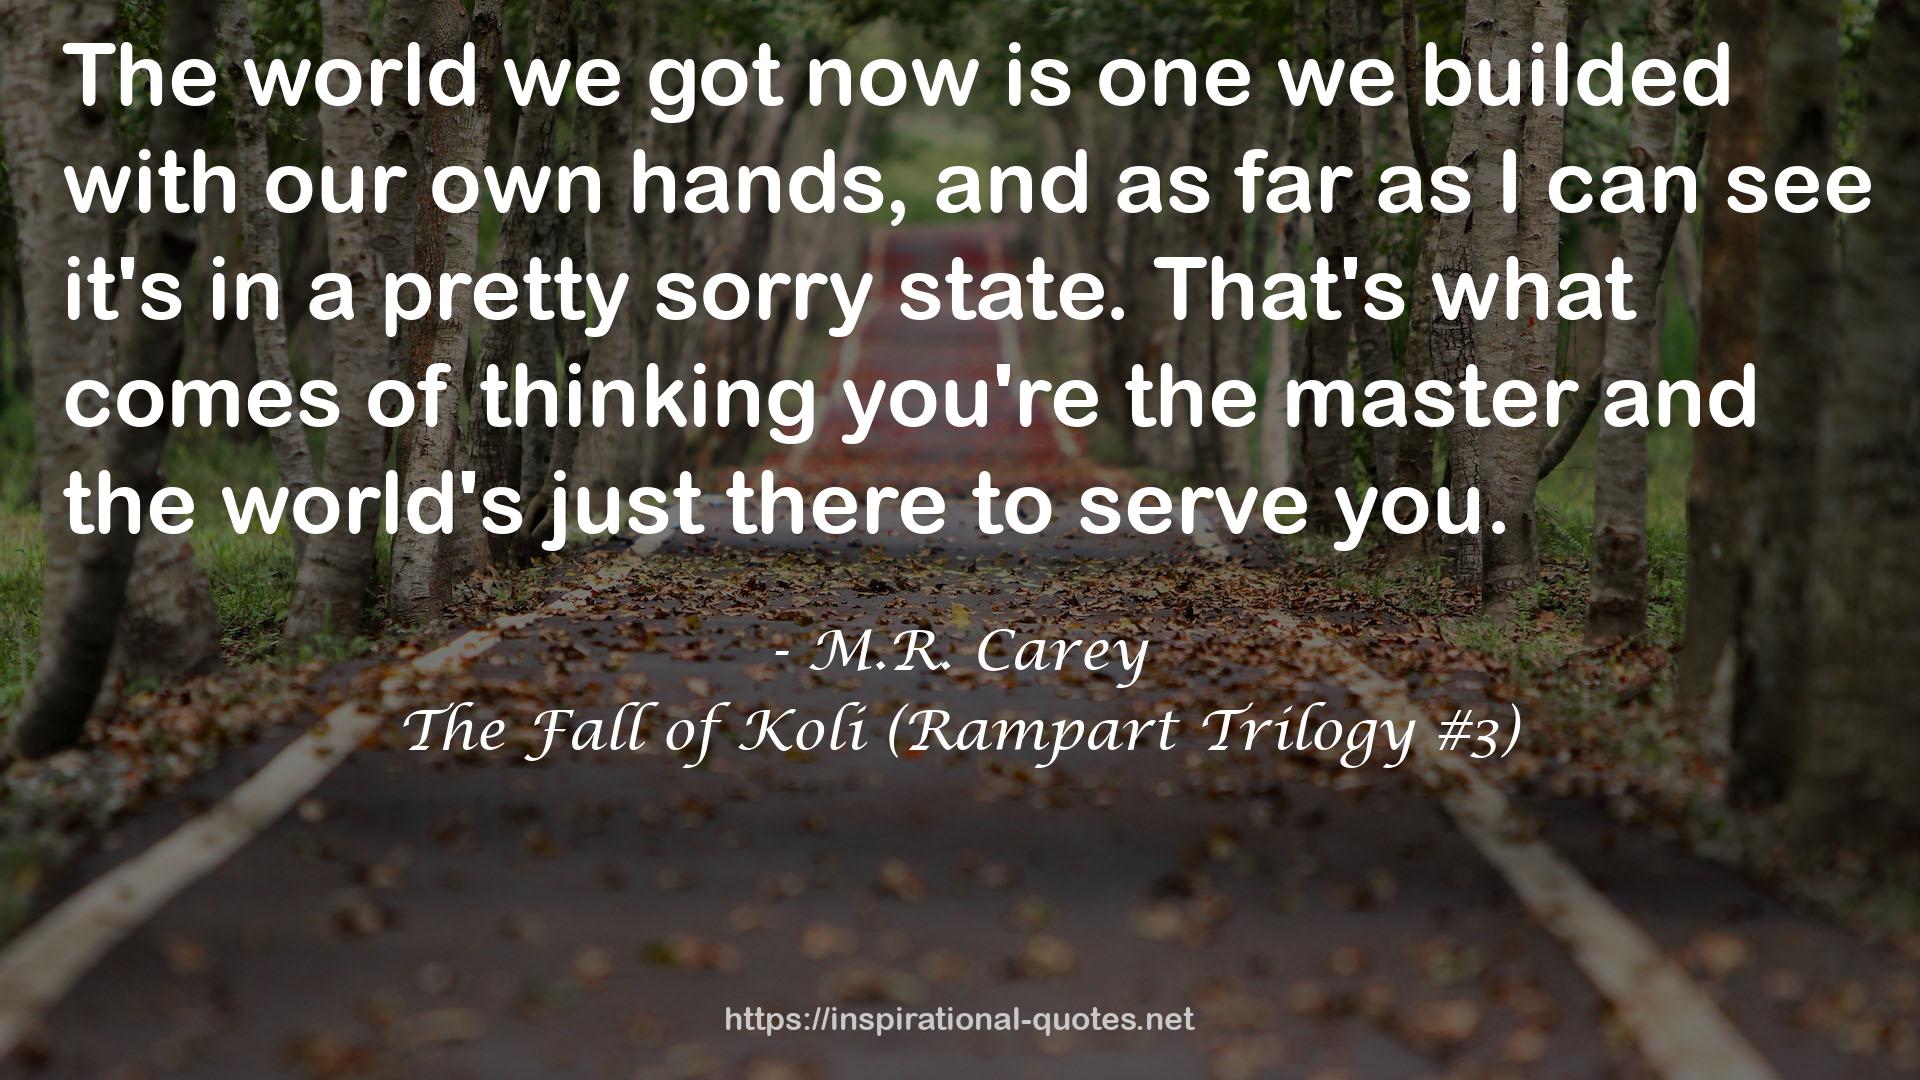 The Fall of Koli (Rampart Trilogy #3) QUOTES